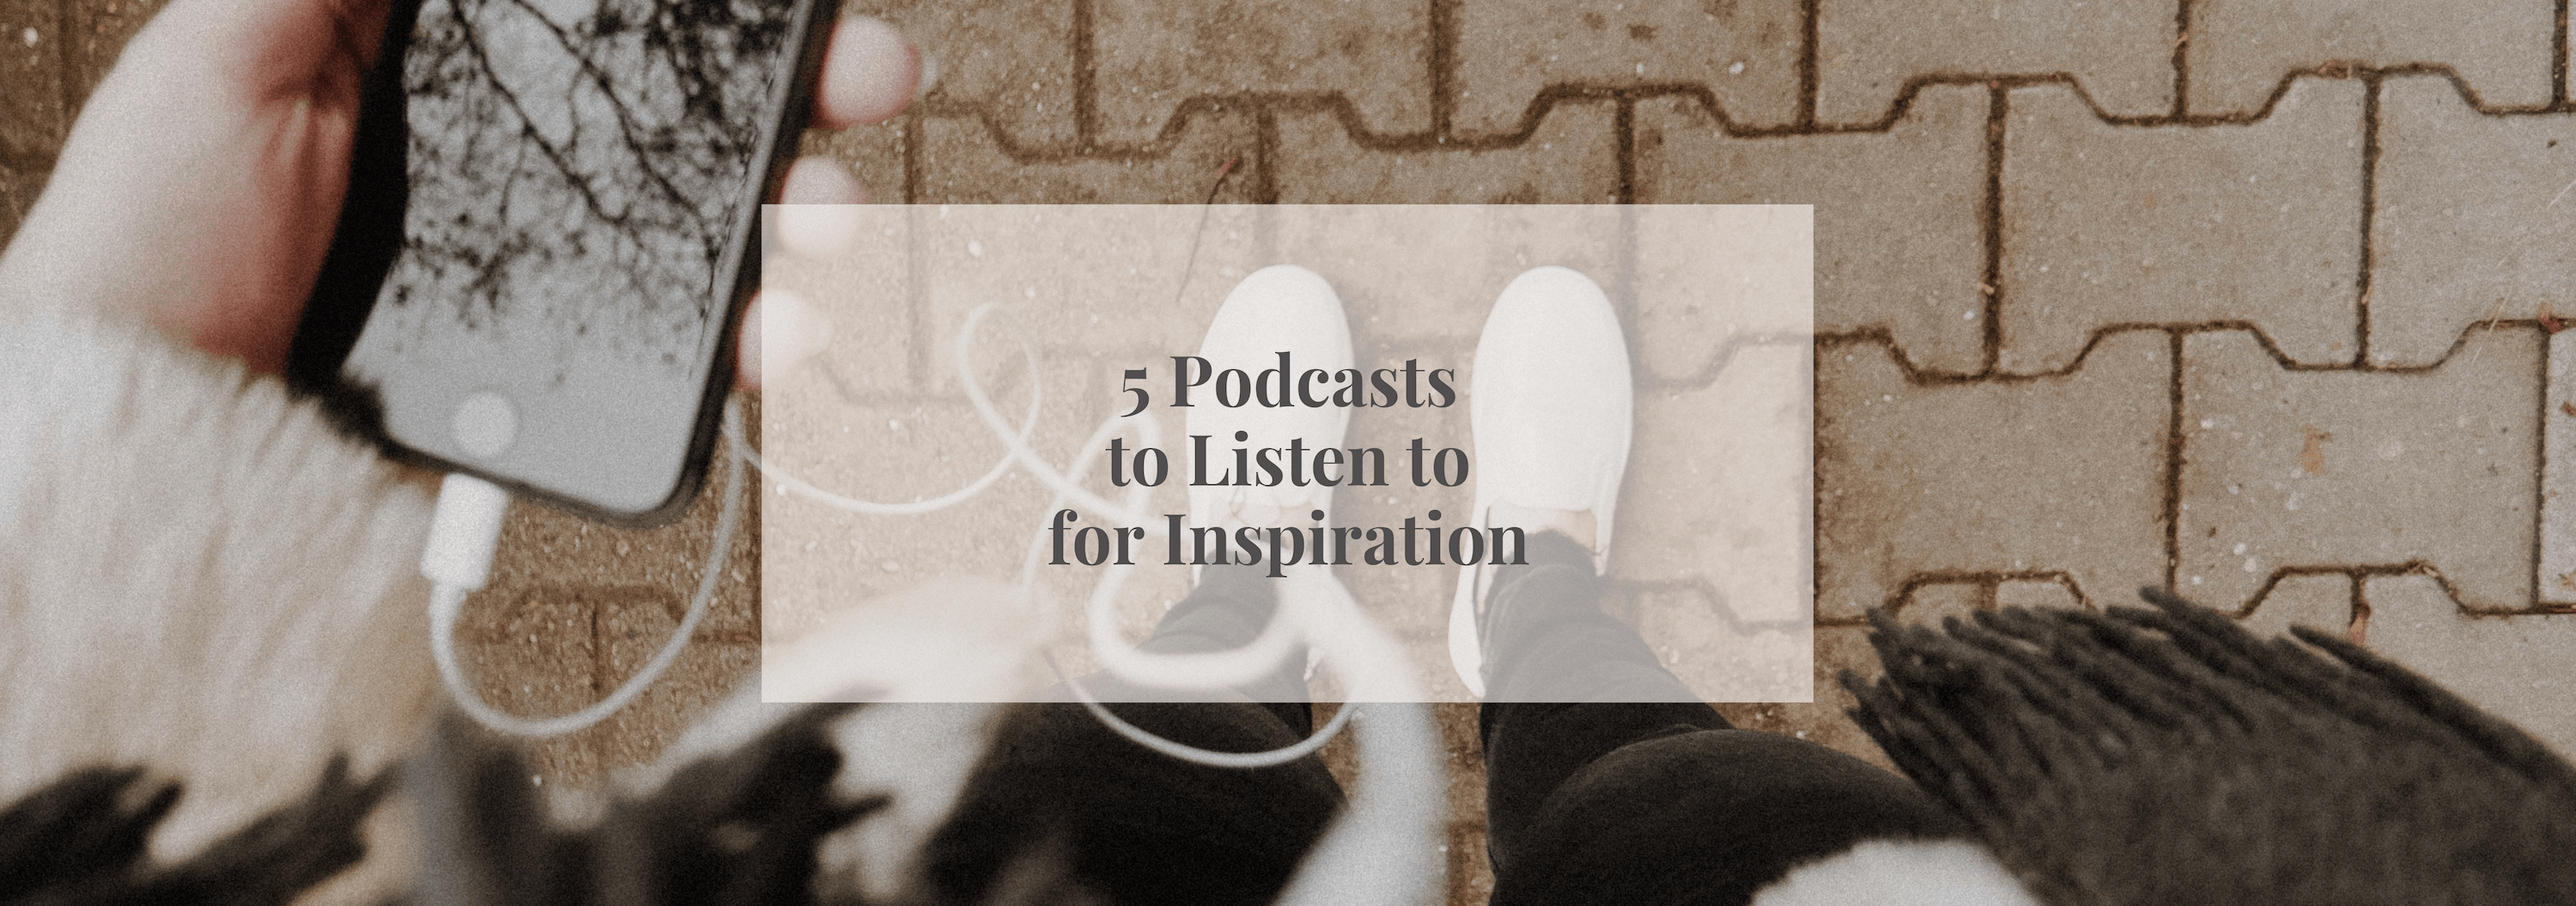 5 Podcasts to Listen to for Inspiration - Numi